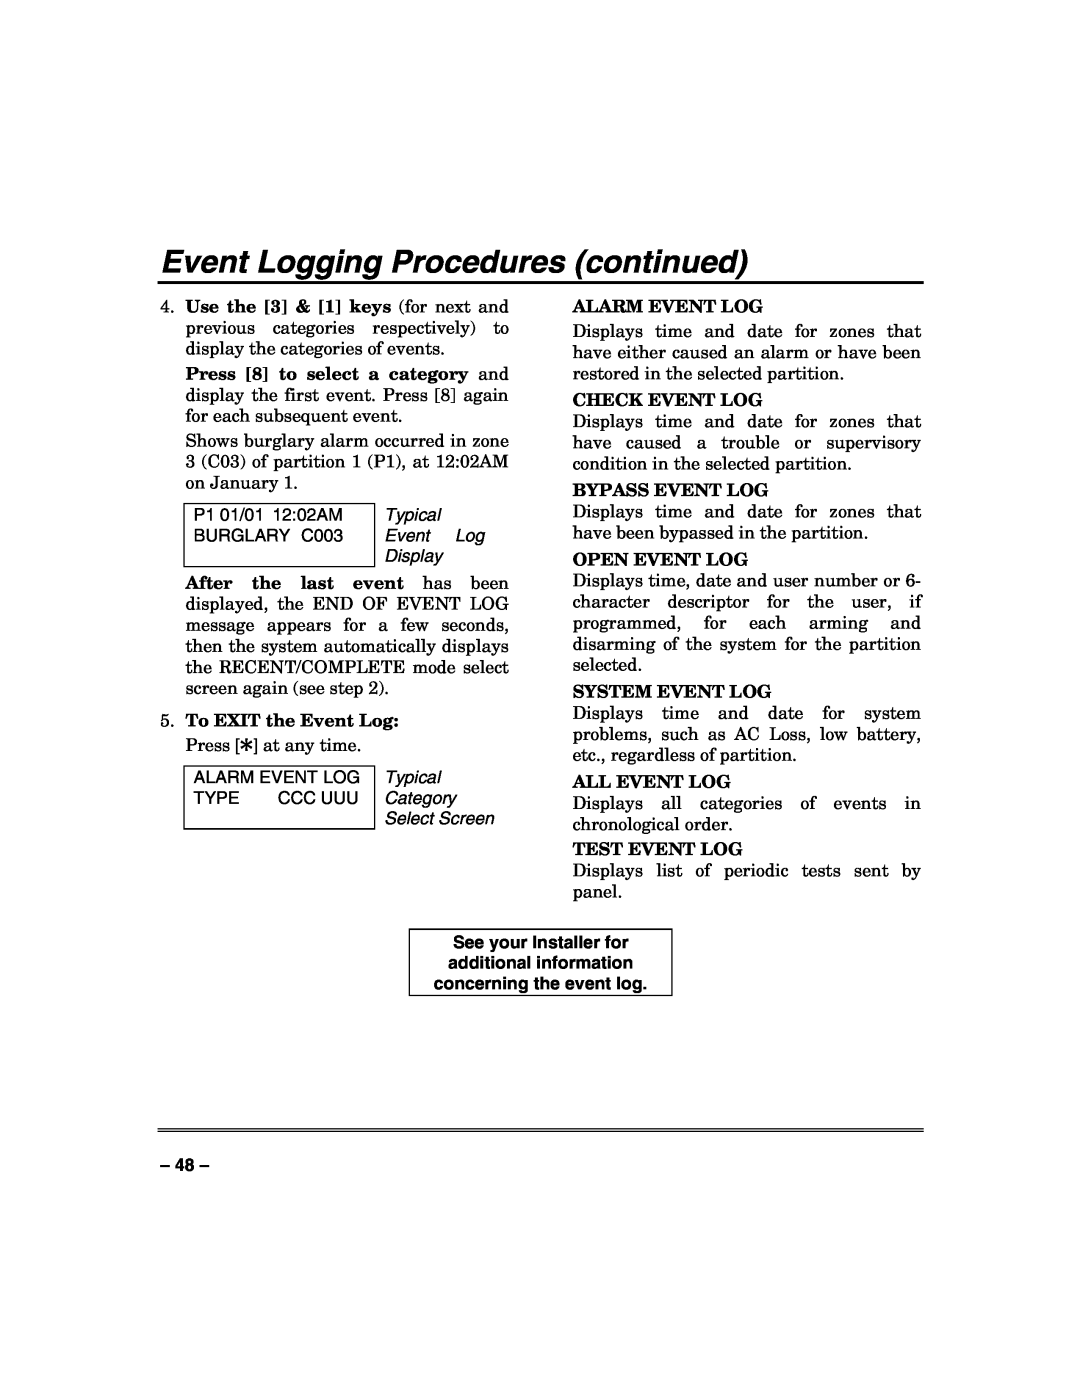 Honeywell VISTA-50PUL manual Event Logging Procedures continued, Use the 3 & 1 keys for next and, Alarm Event Log, Typical 